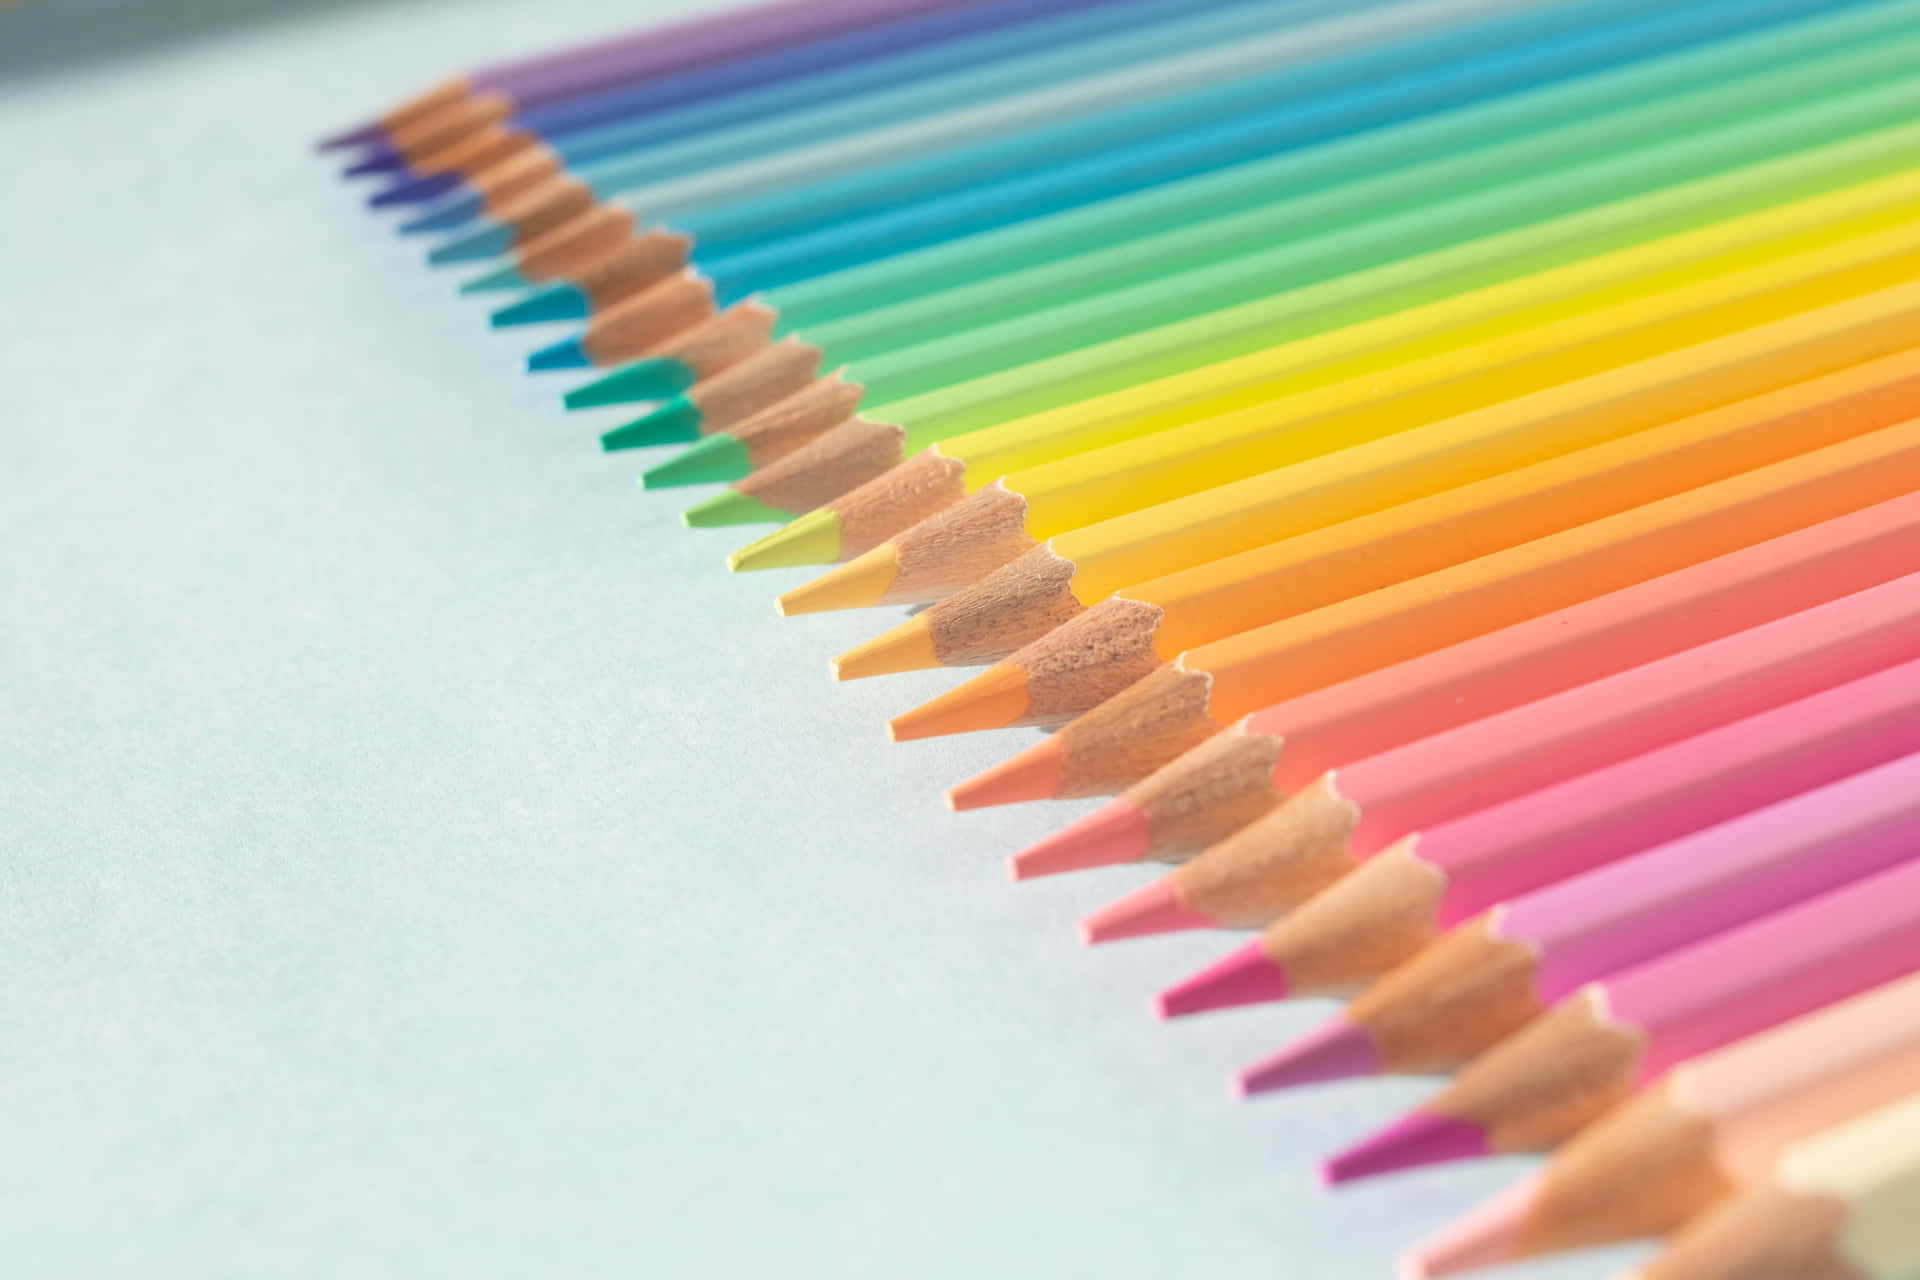 A colorful rainbow of pastel dreaminess. Wallpaper